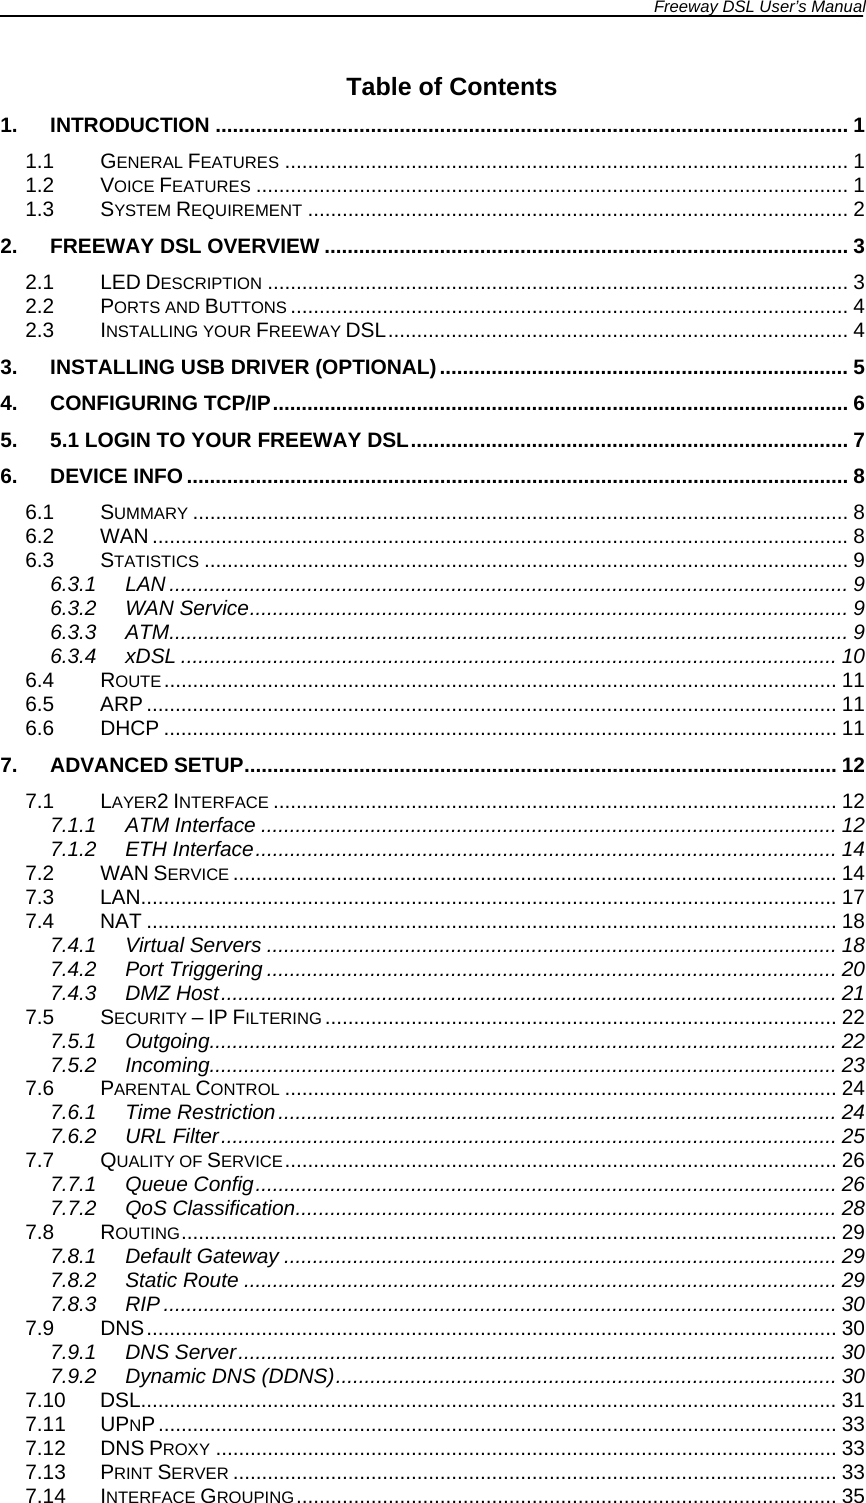 Freeway DSL User’s Manual  Table of Contents 1. INTRODUCTION .............................................................................................................. 1 1.1 GENERAL FEATURES .................................................................................................. 1 1.2 VOICE FEATURES ....................................................................................................... 1 1.3 SYSTEM REQUIREMENT .............................................................................................. 2 2. FREEWAY DSL OVERVIEW ........................................................................................... 3 2.1 LED DESCRIPTION ..................................................................................................... 3 2.2 PORTS AND BUTTONS ................................................................................................. 4 2.3 INSTALLING YOUR FREEWAY DSL................................................................................ 4 3. INSTALLING USB DRIVER (OPTIONAL)....................................................................... 5 4. CONFIGURING TCP/IP.................................................................................................... 6 5. 5.1 LOGIN TO YOUR FREEWAY DSL............................................................................ 7 6. DEVICE INFO ................................................................................................................... 8 6.1 SUMMARY .................................................................................................................. 8 6.2 WAN .........................................................................................................................8 6.3 STATISTICS ................................................................................................................ 9 6.3.1 LAN ...................................................................................................................... 9 6.3.2 WAN Service........................................................................................................ 9 6.3.3 ATM...................................................................................................................... 9 6.3.4 xDSL .................................................................................................................. 10 6.4 ROUTE..................................................................................................................... 11 6.5 ARP ........................................................................................................................ 11 6.6 DHCP ..................................................................................................................... 11 7. ADVANCED SETUP....................................................................................................... 12 7.1 LAYER2 INTERFACE .................................................................................................. 12 7.1.1 ATM Interface .................................................................................................... 12 7.1.2 ETH Interface..................................................................................................... 14 7.2 WAN SERVICE ......................................................................................................... 14 7.3 LAN.........................................................................................................................17 7.4 NAT ........................................................................................................................ 18 7.4.1 Virtual Servers ................................................................................................... 18 7.4.2 Port Triggering ................................................................................................... 20 7.4.3 DMZ Host........................................................................................................... 21 7.5 SECURITY – IP FILTERING ......................................................................................... 22 7.5.1 Outgoing............................................................................................................. 22 7.5.2 Incoming............................................................................................................. 23 7.6 PARENTAL CONTROL ................................................................................................ 24 7.6.1 Time Restriction................................................................................................. 24 7.6.2 URL Filter........................................................................................................... 25 7.7 QUALITY OF SERVICE................................................................................................ 26 7.7.1 Queue Config..................................................................................................... 26 7.7.2 QoS Classification.............................................................................................. 28 7.8 ROUTING.................................................................................................................. 29 7.8.1 Default Gateway ................................................................................................ 29 7.8.2 Static Route ....................................................................................................... 29 7.8.3 RIP ..................................................................................................................... 30 7.9  DNS........................................................................................................................ 30 7.9.1 DNS Server........................................................................................................ 30 7.9.2 Dynamic DNS (DDNS)....................................................................................... 30 7.10 DSL......................................................................................................................... 31 7.11 UPNP...................................................................................................................... 33 7.12 DNS PROXY ............................................................................................................ 33 7.13 PRINT SERVER ......................................................................................................... 33 7.14 INTERFACE GROUPING.............................................................................................. 35 